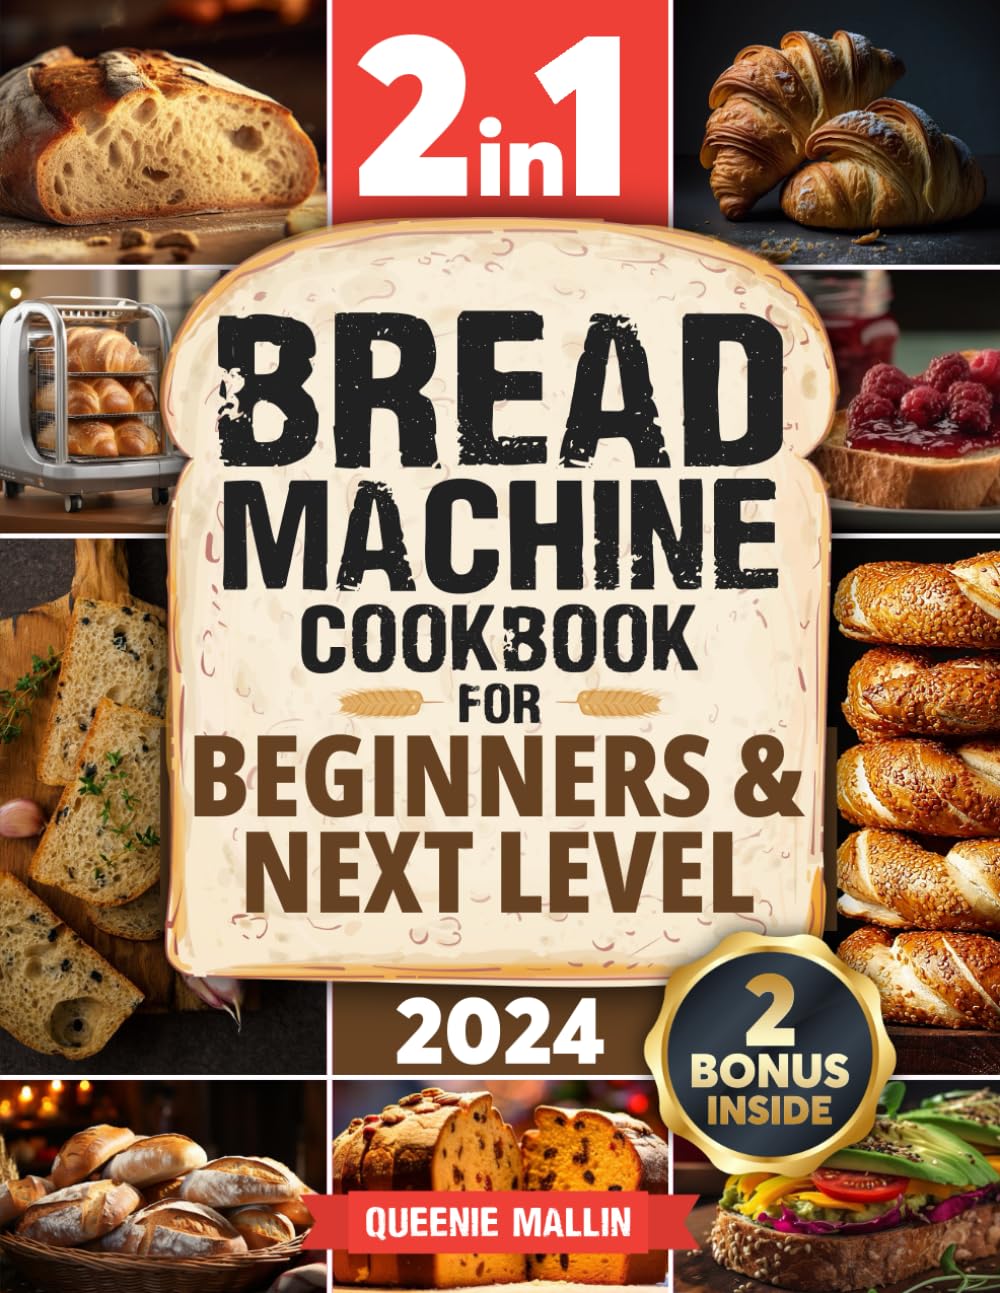 Bread Machine Cookbook: 2 in1|Mastering the Art of Baking & Delicious Recipes. From Basics to Advance Use: Classic and Most Beloved Breads, Gourmet, Jams, Snacks and More, All Homemade!